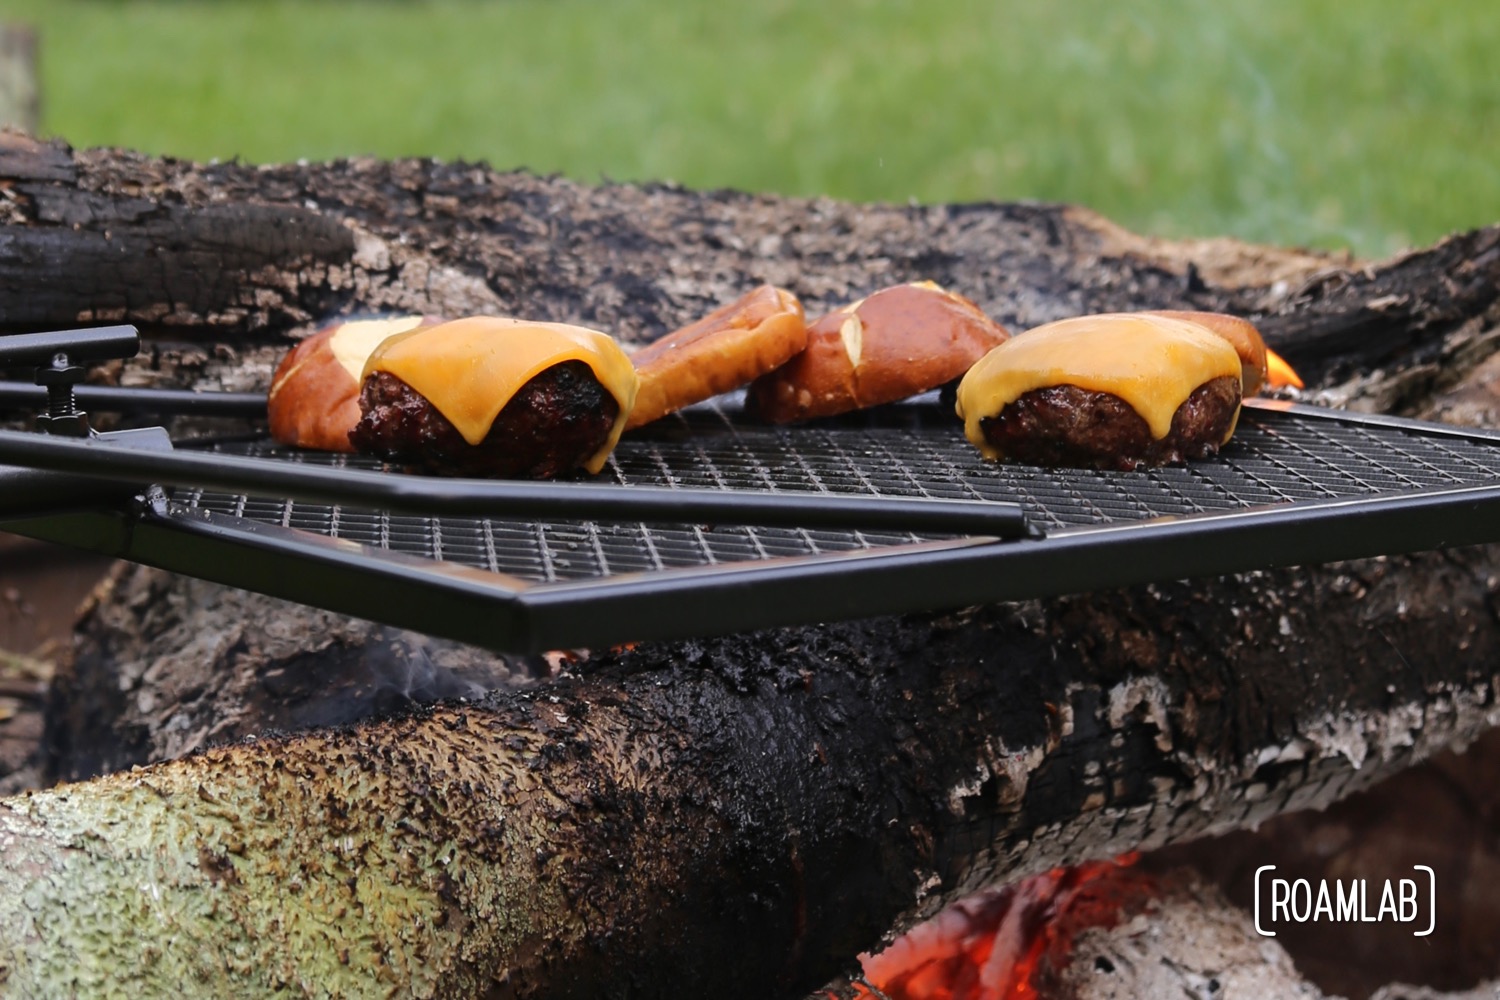 Grilling burgers outside, over a campfire on the Adjust-A-Grill.